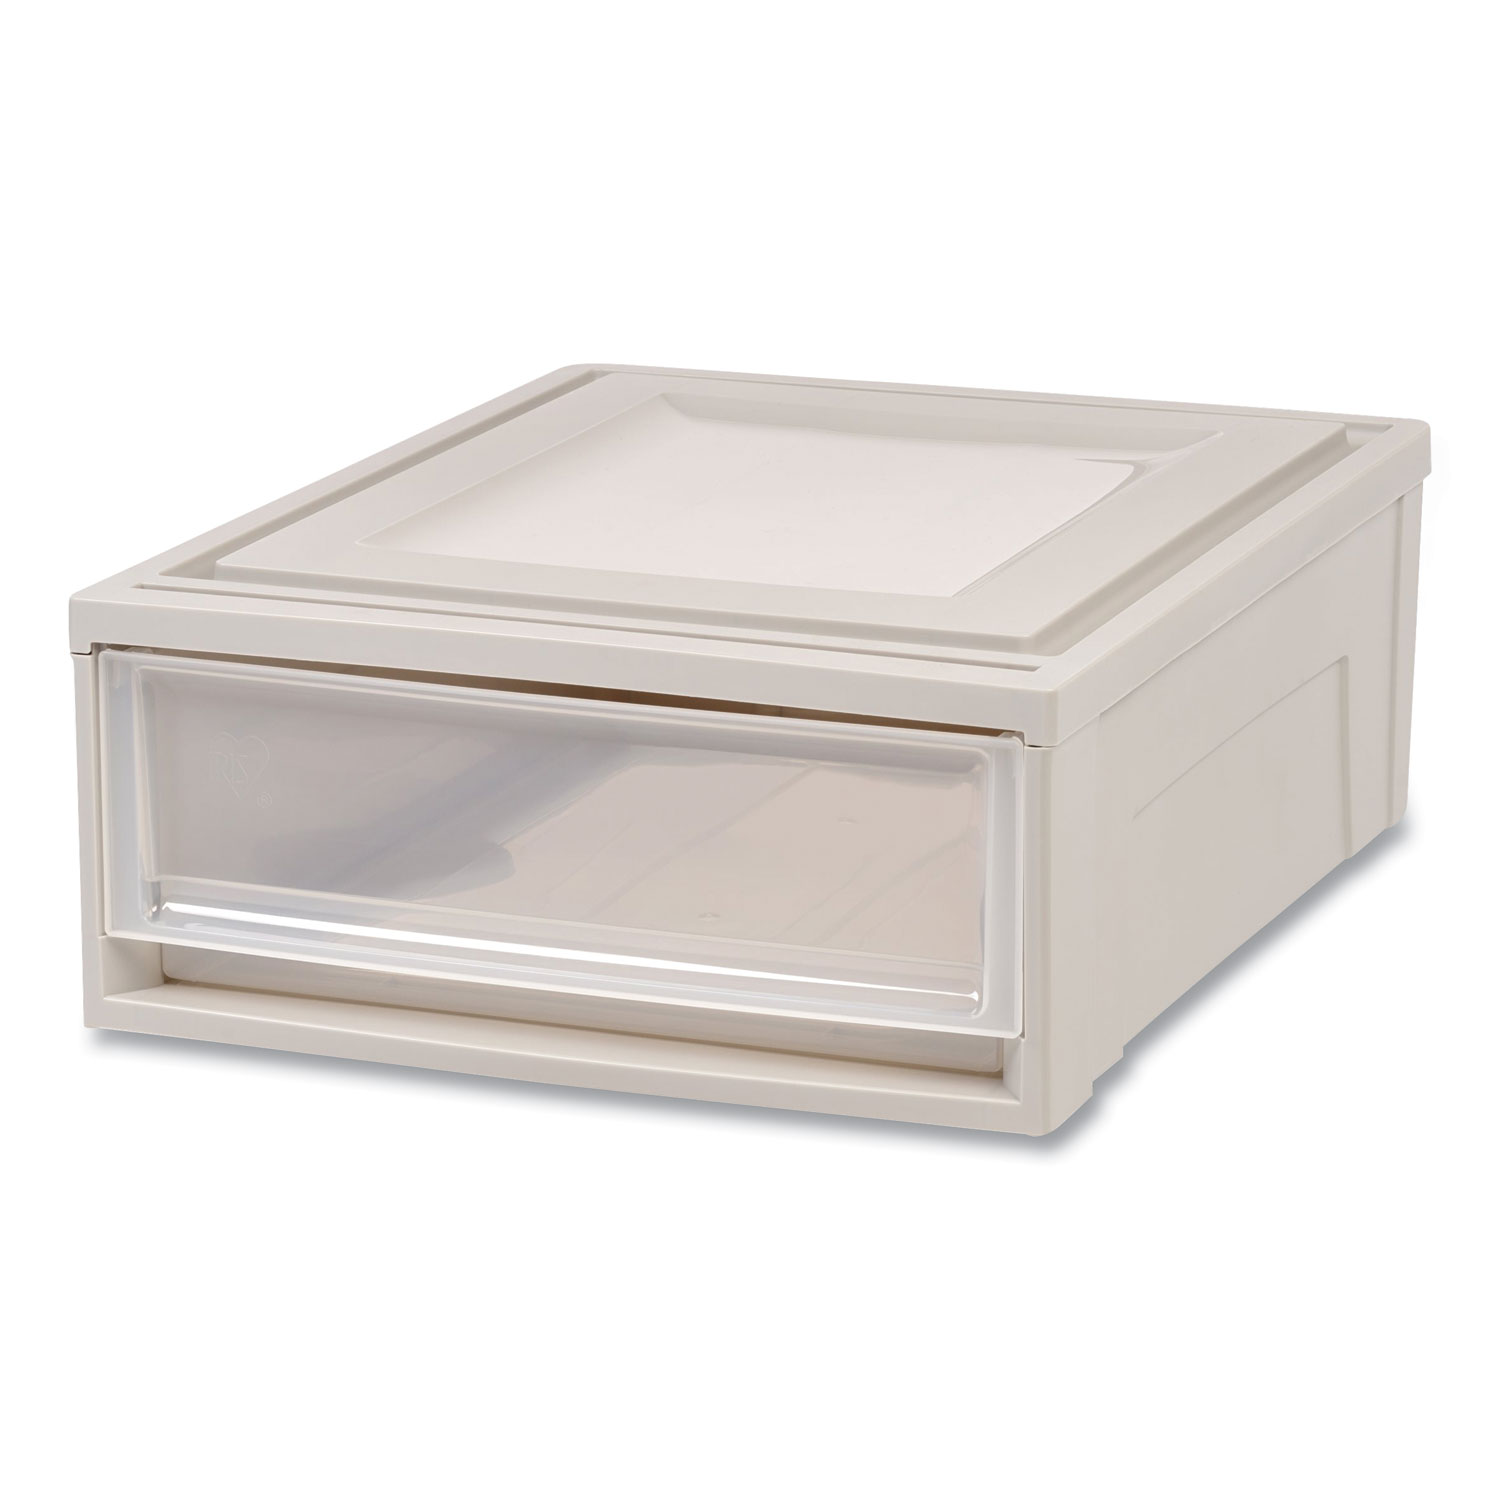  IRIS 170441 Stackable Storage Drawer, 5.5 gal, 15.7 x 19.7 x 6.5, Gray/Translucent Frost (IRS24359570) 